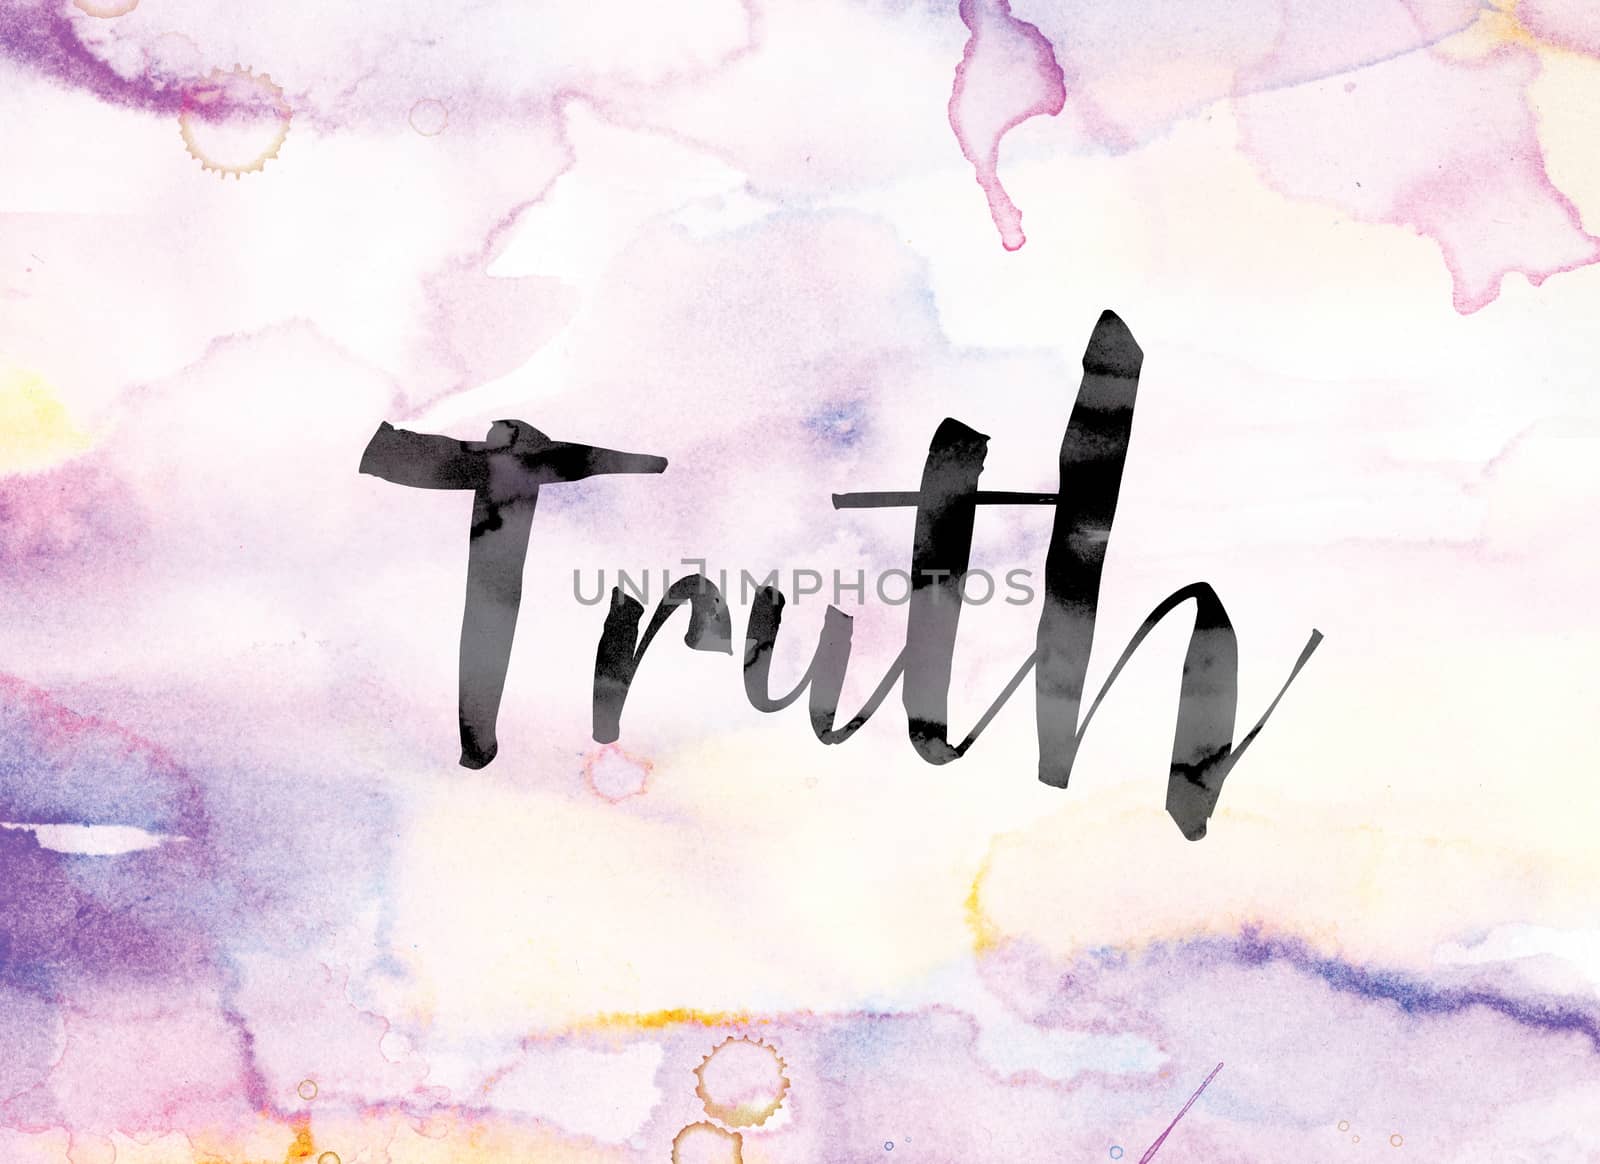 The word "Truth" painted in black ink over a colorful watercolor washed background concept and theme.